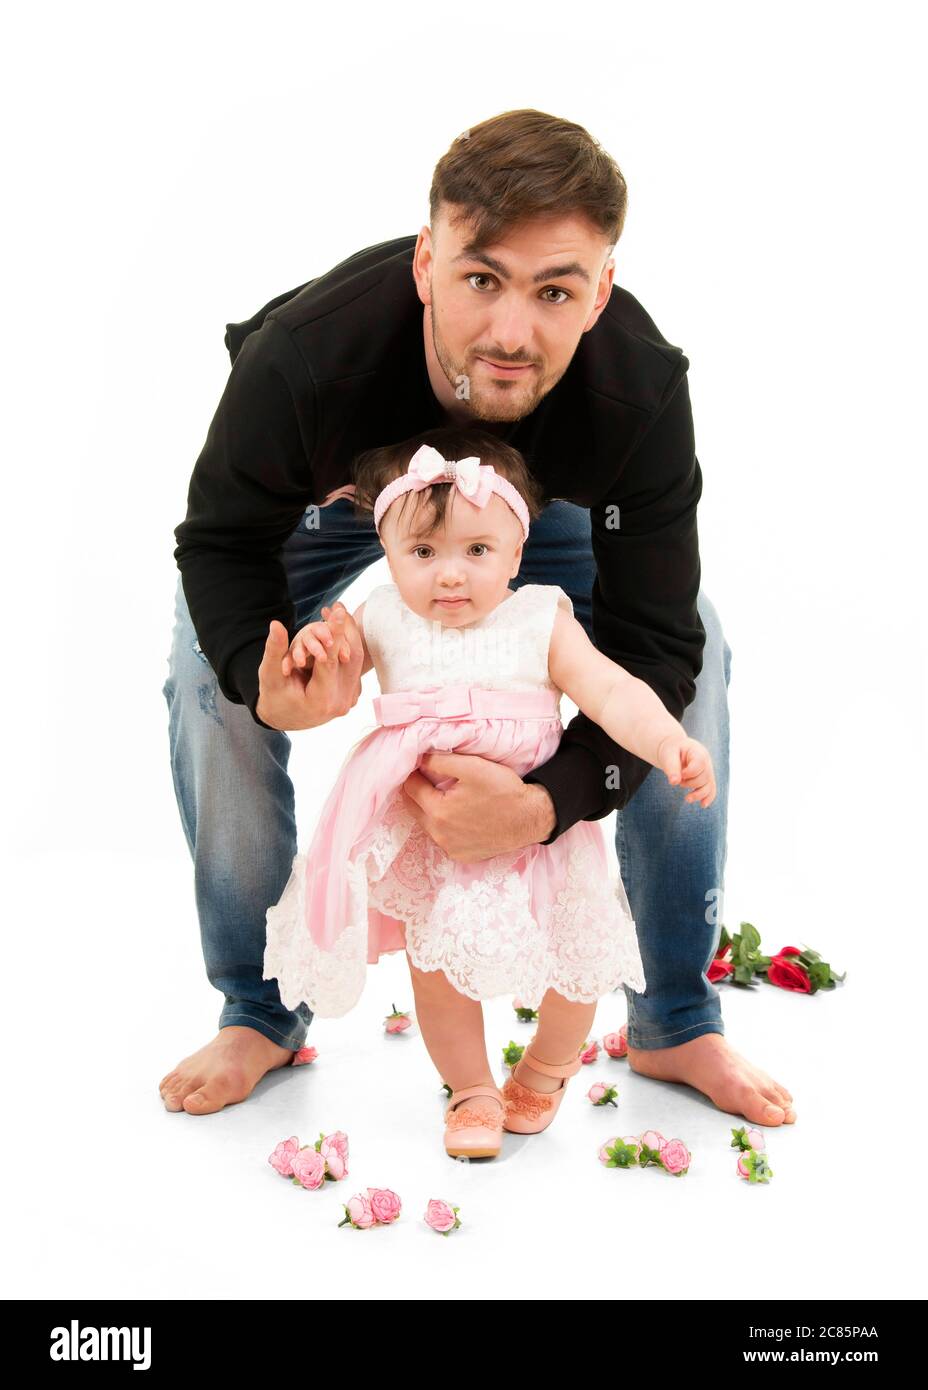 Vertical lifestyle portrait of a young dad helping his baby daughter to walk on her first birthday. Stock Photo